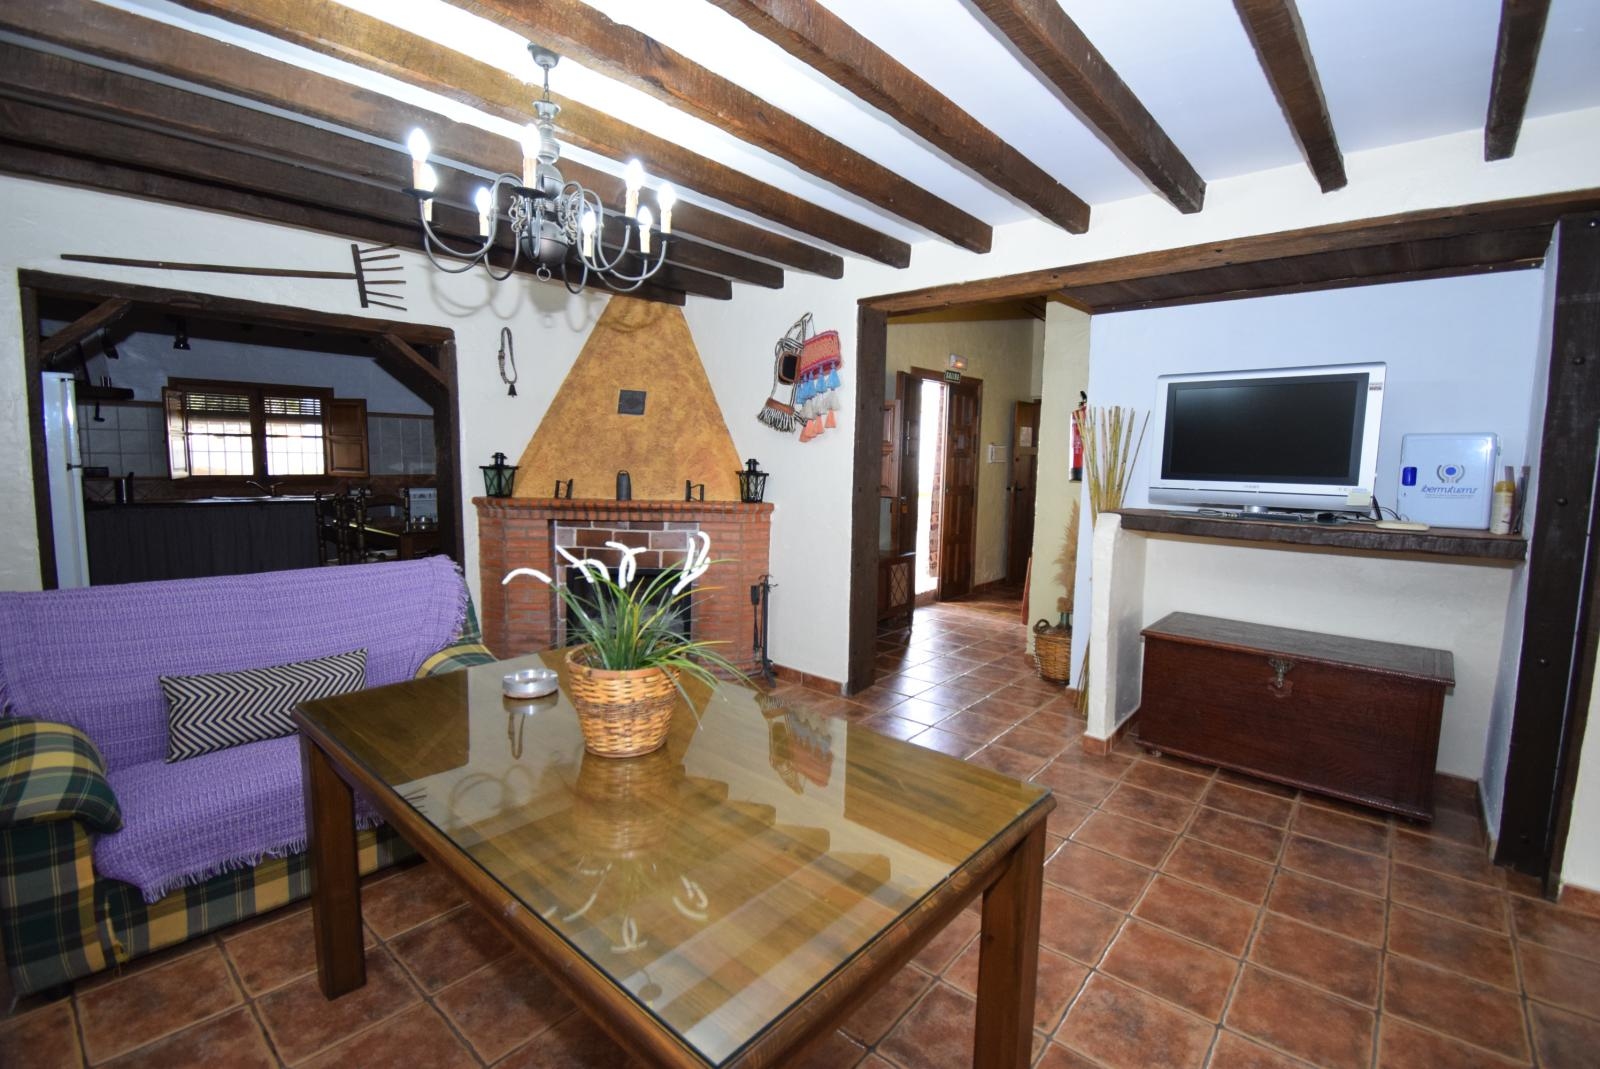 MALAGA HOLIDAY LET COUNTRY PROPERTY FOR SALE